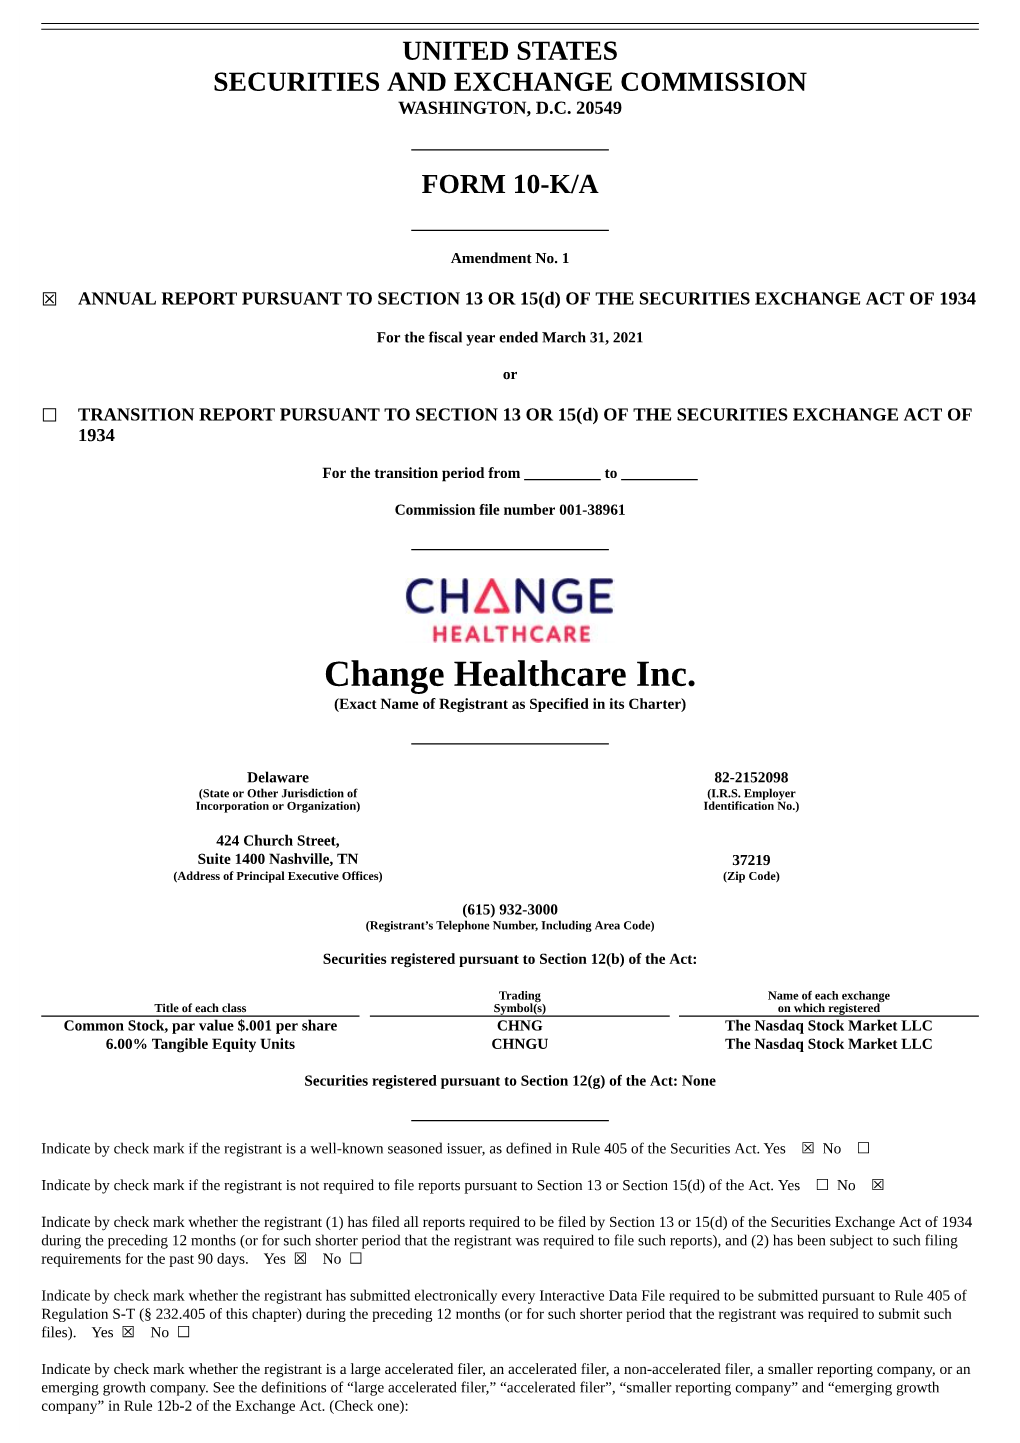 Change Healthcare Inc. (Exact Name of Registrant As Specified in Its Charter)